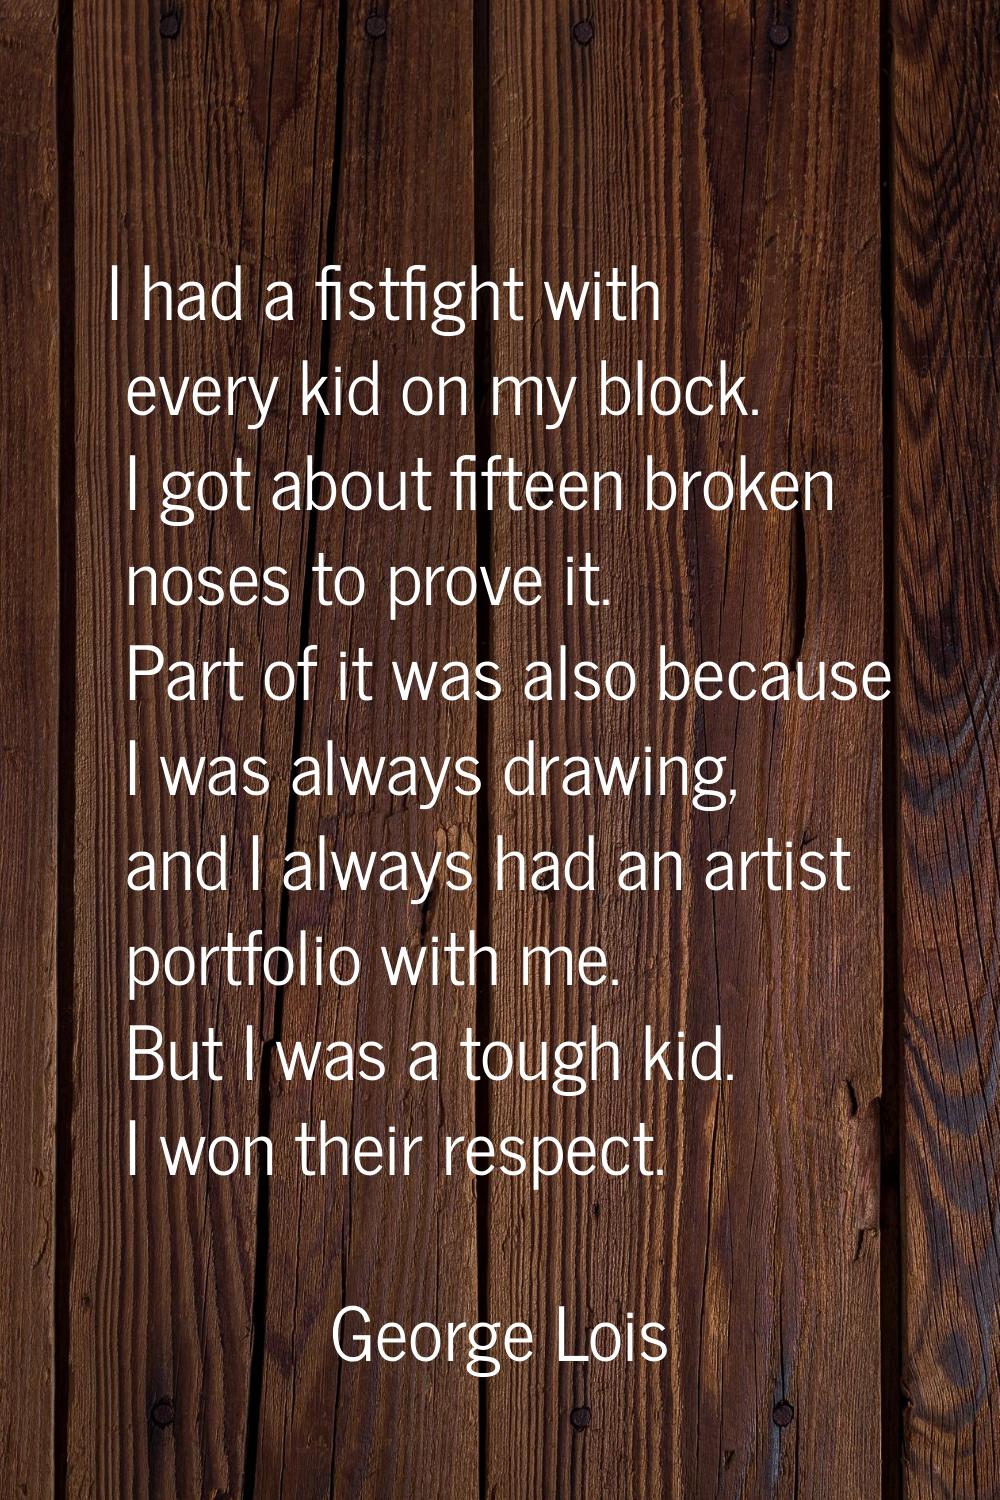 I had a fistfight with every kid on my block. I got about fifteen broken noses to prove it. Part of